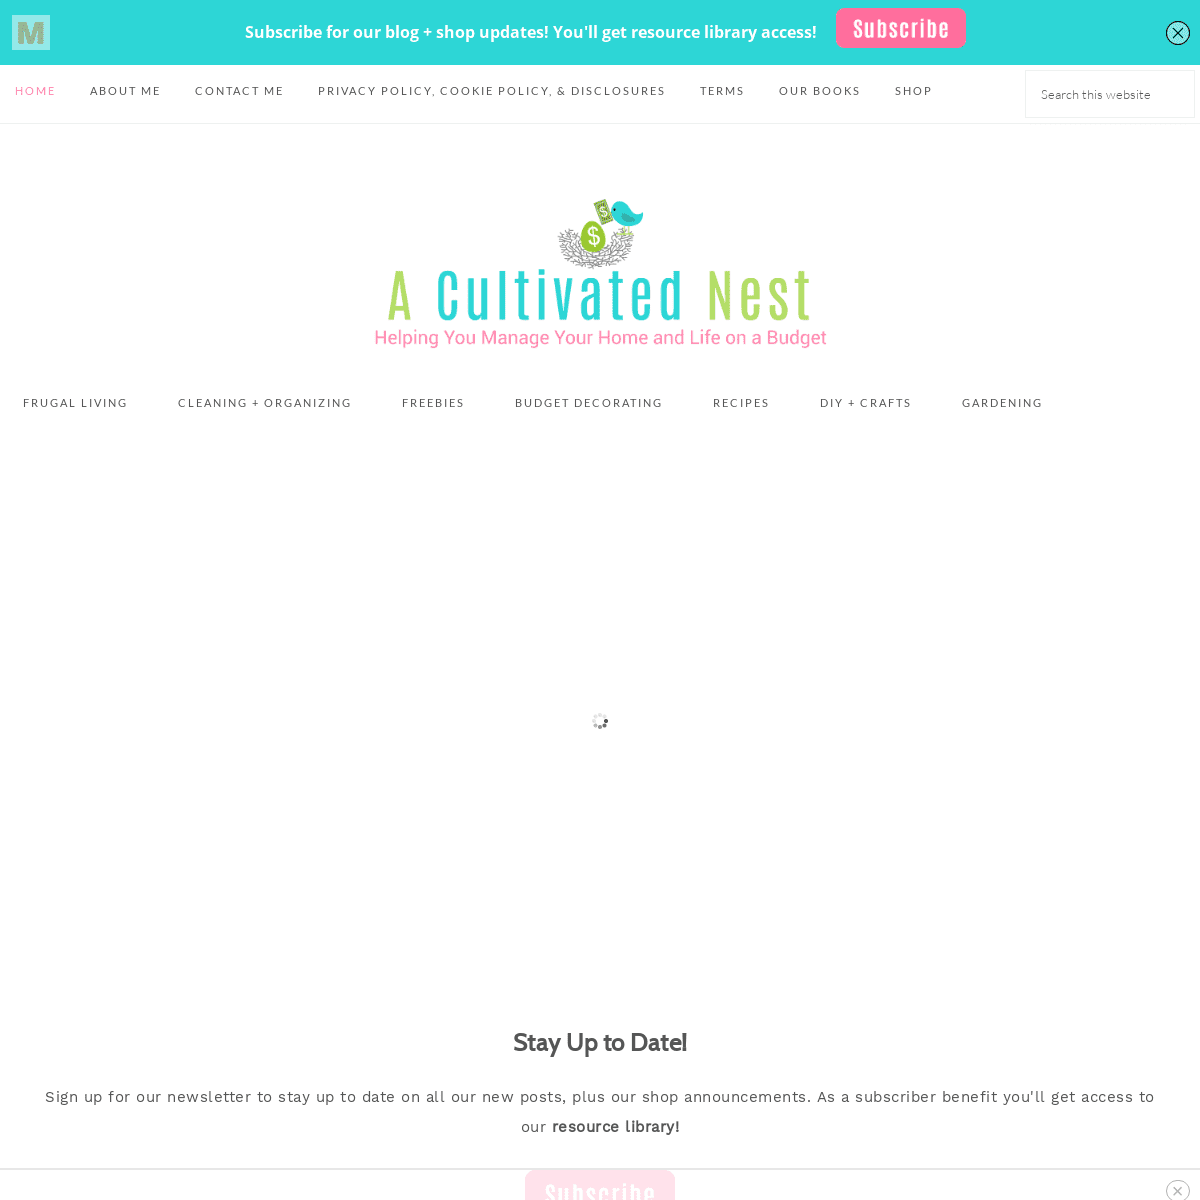 A Cultivated Nest - Helping You Manage Your Home and Life on a Budget